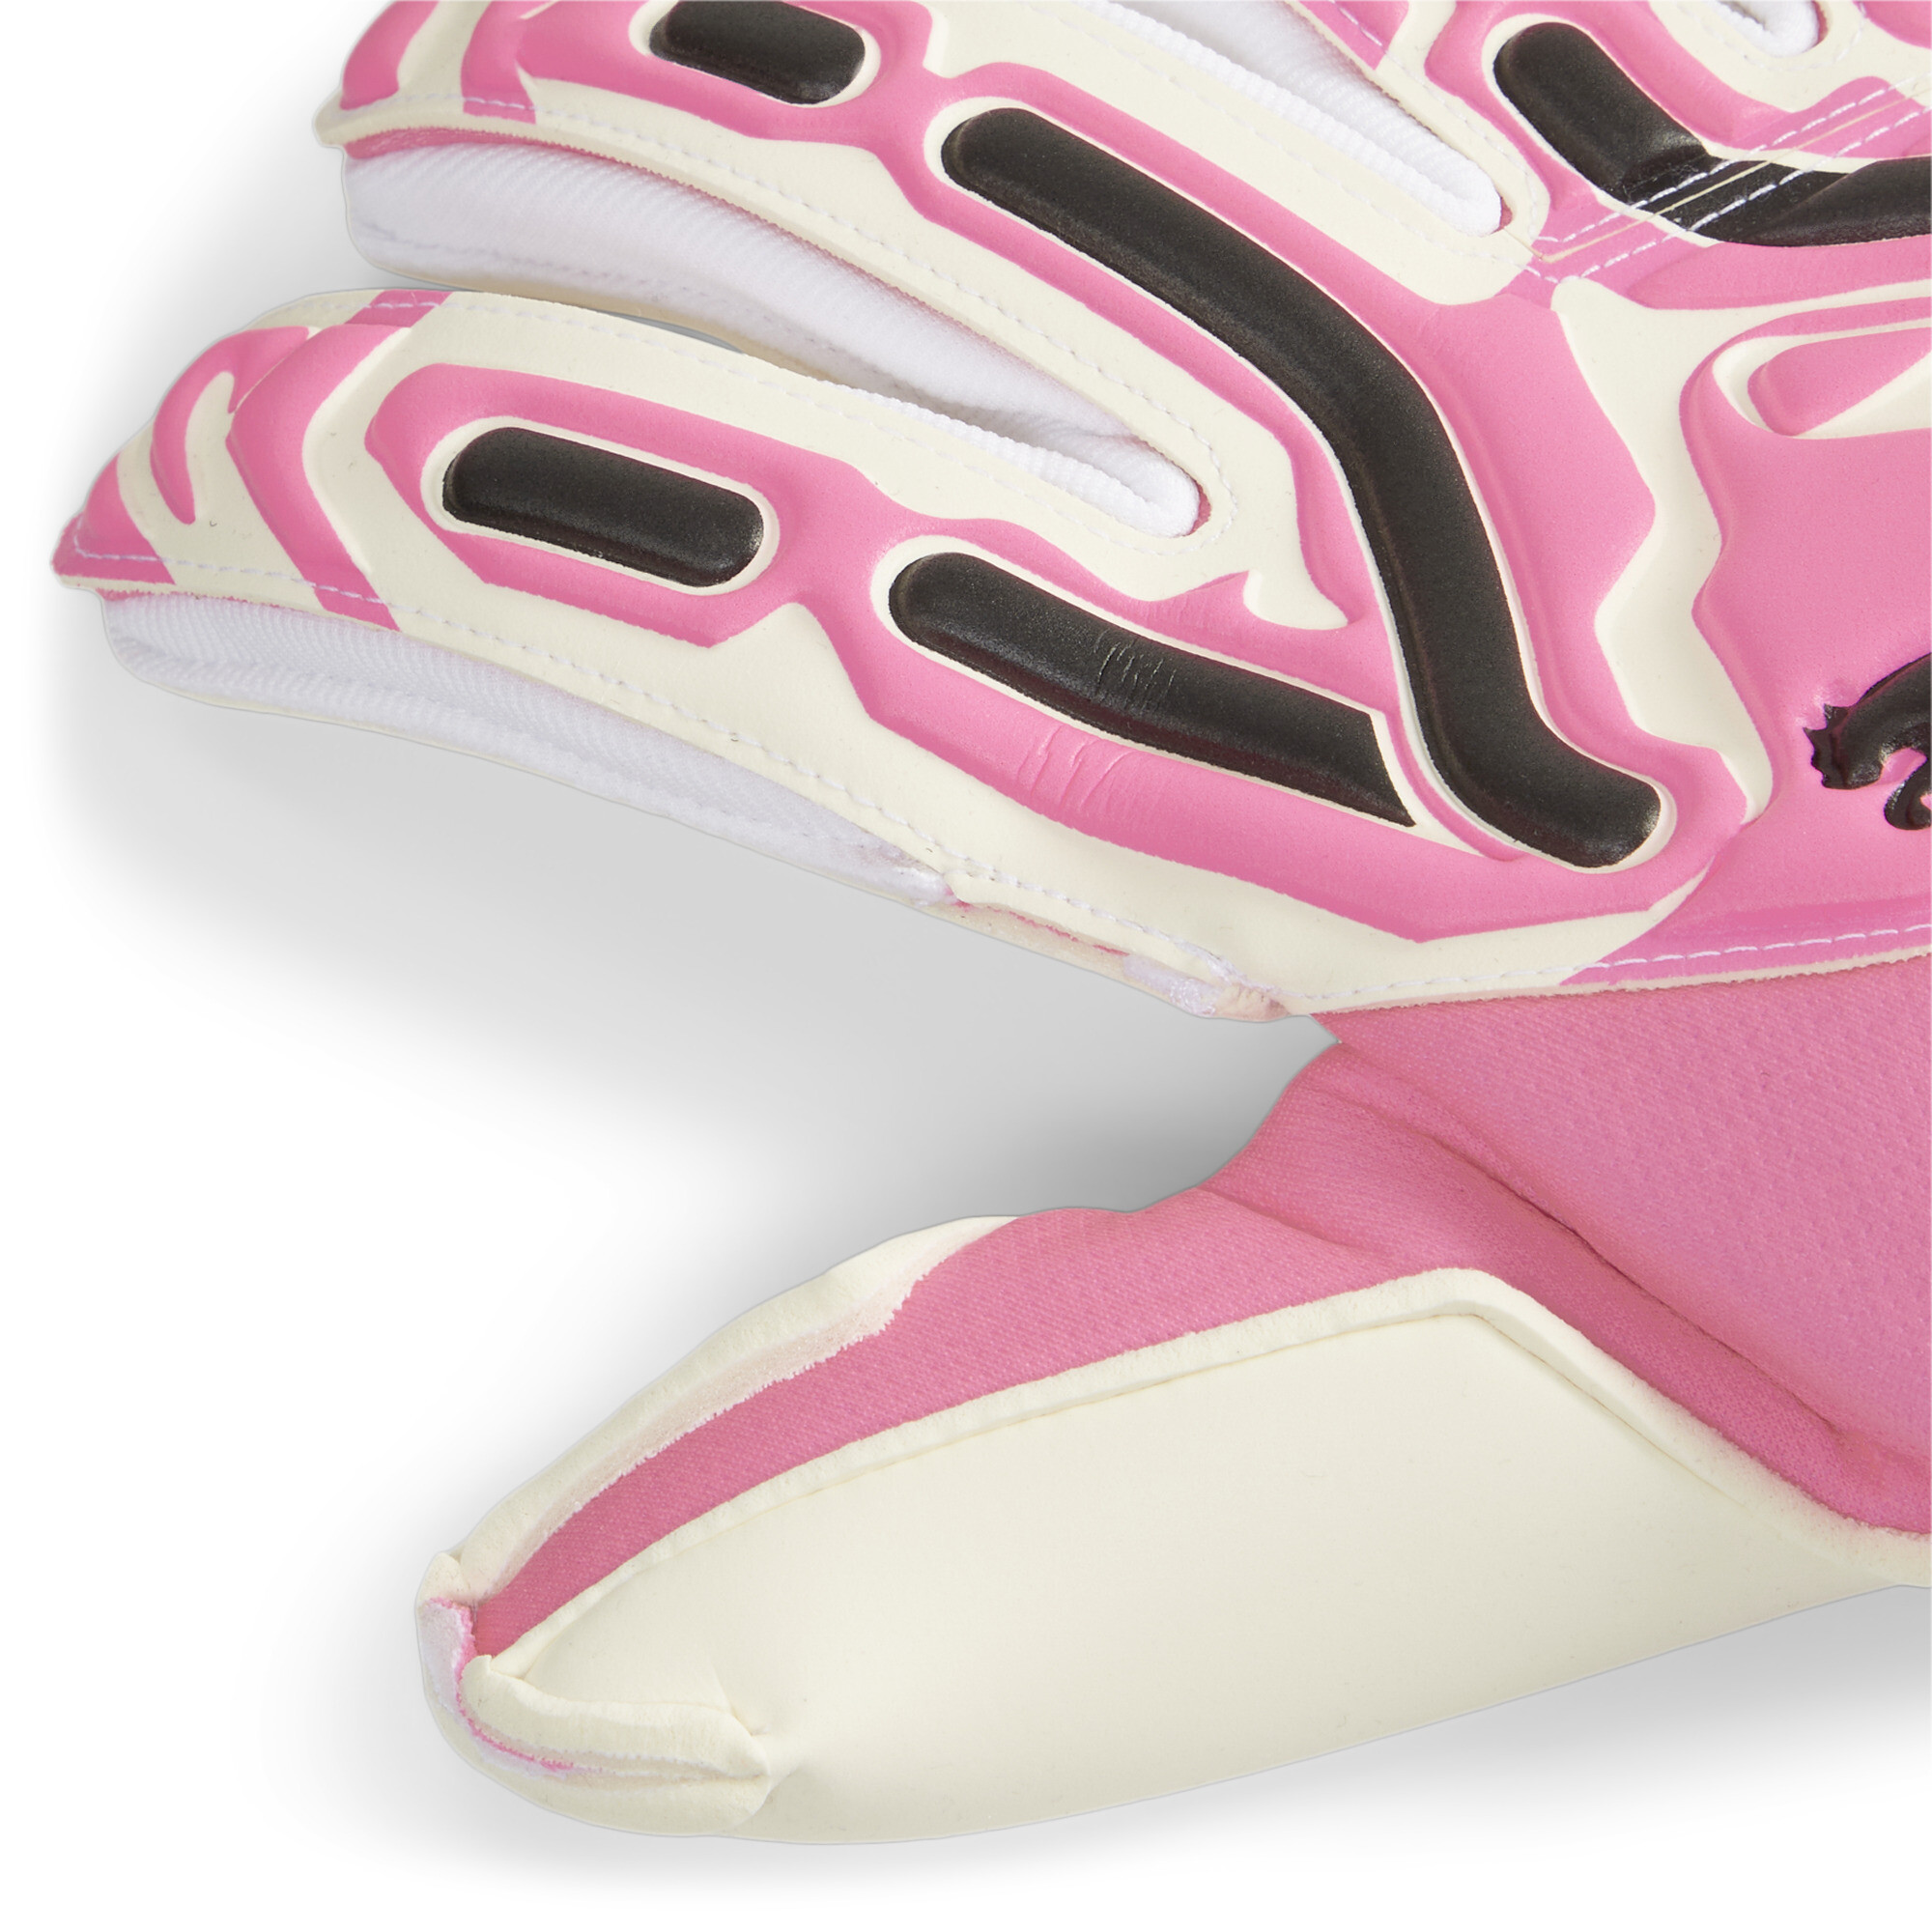 Puma ULTRA Ultimate Hybrid Goalkeeper Gloves, Pink, Size 11, Accessories